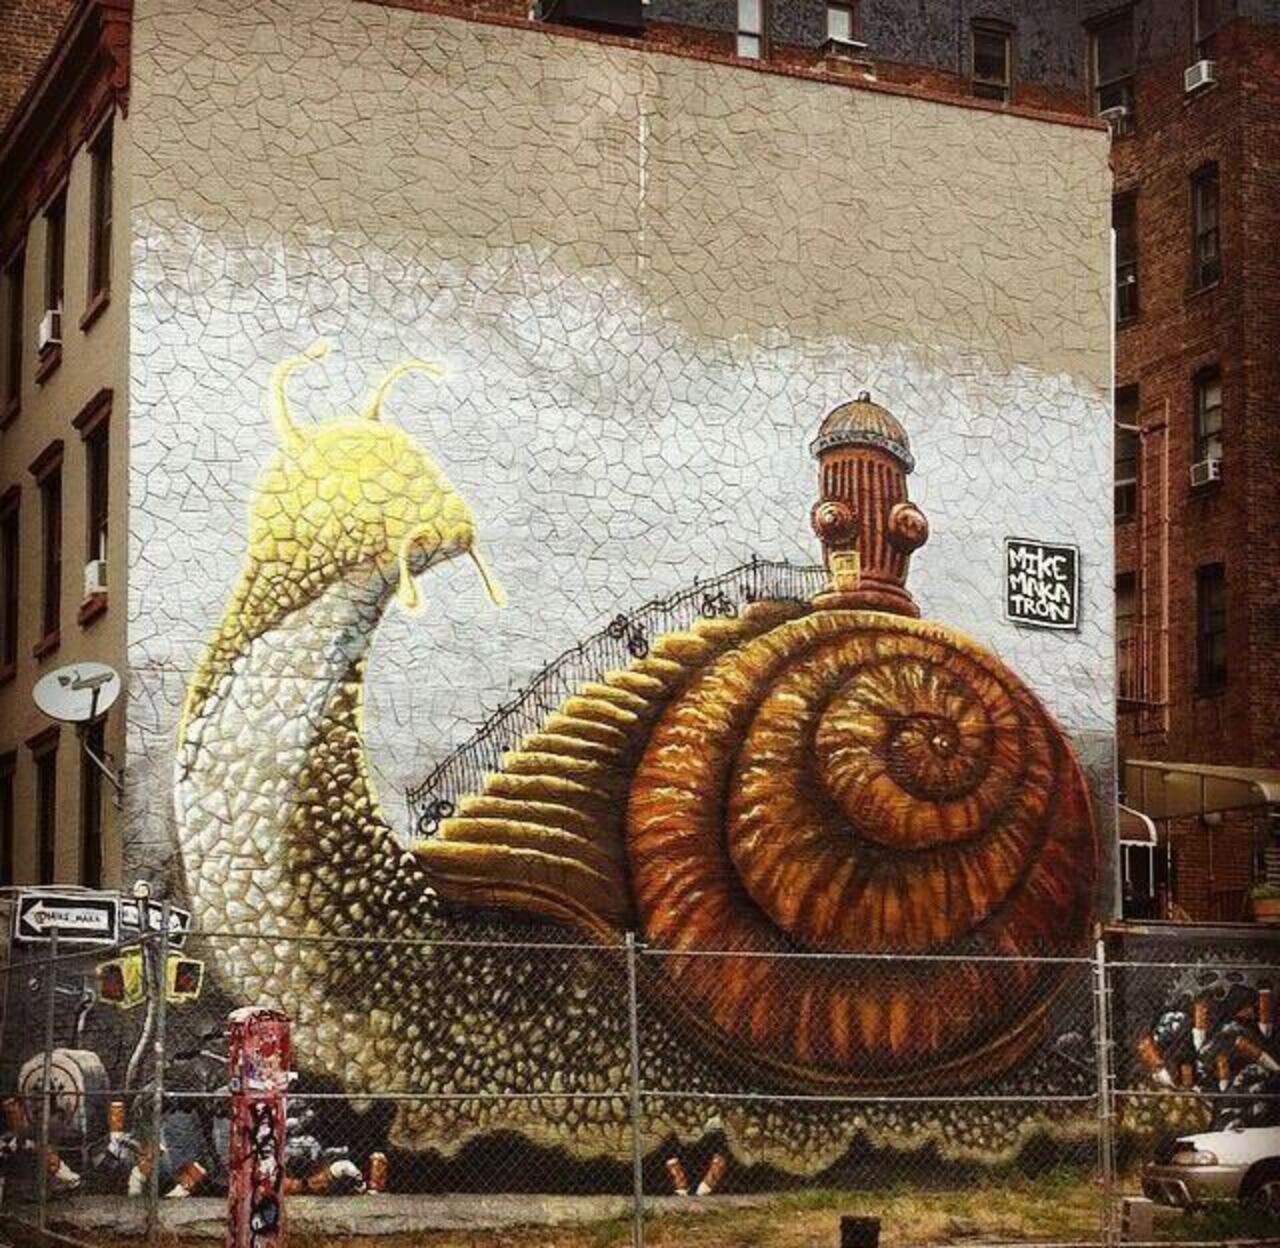 Artist Mike Makatron fantastic large scale Street Art located in Brooklyn, NY #art #graffiti #mural #streetart http://t.co/vpEqFw8O6h